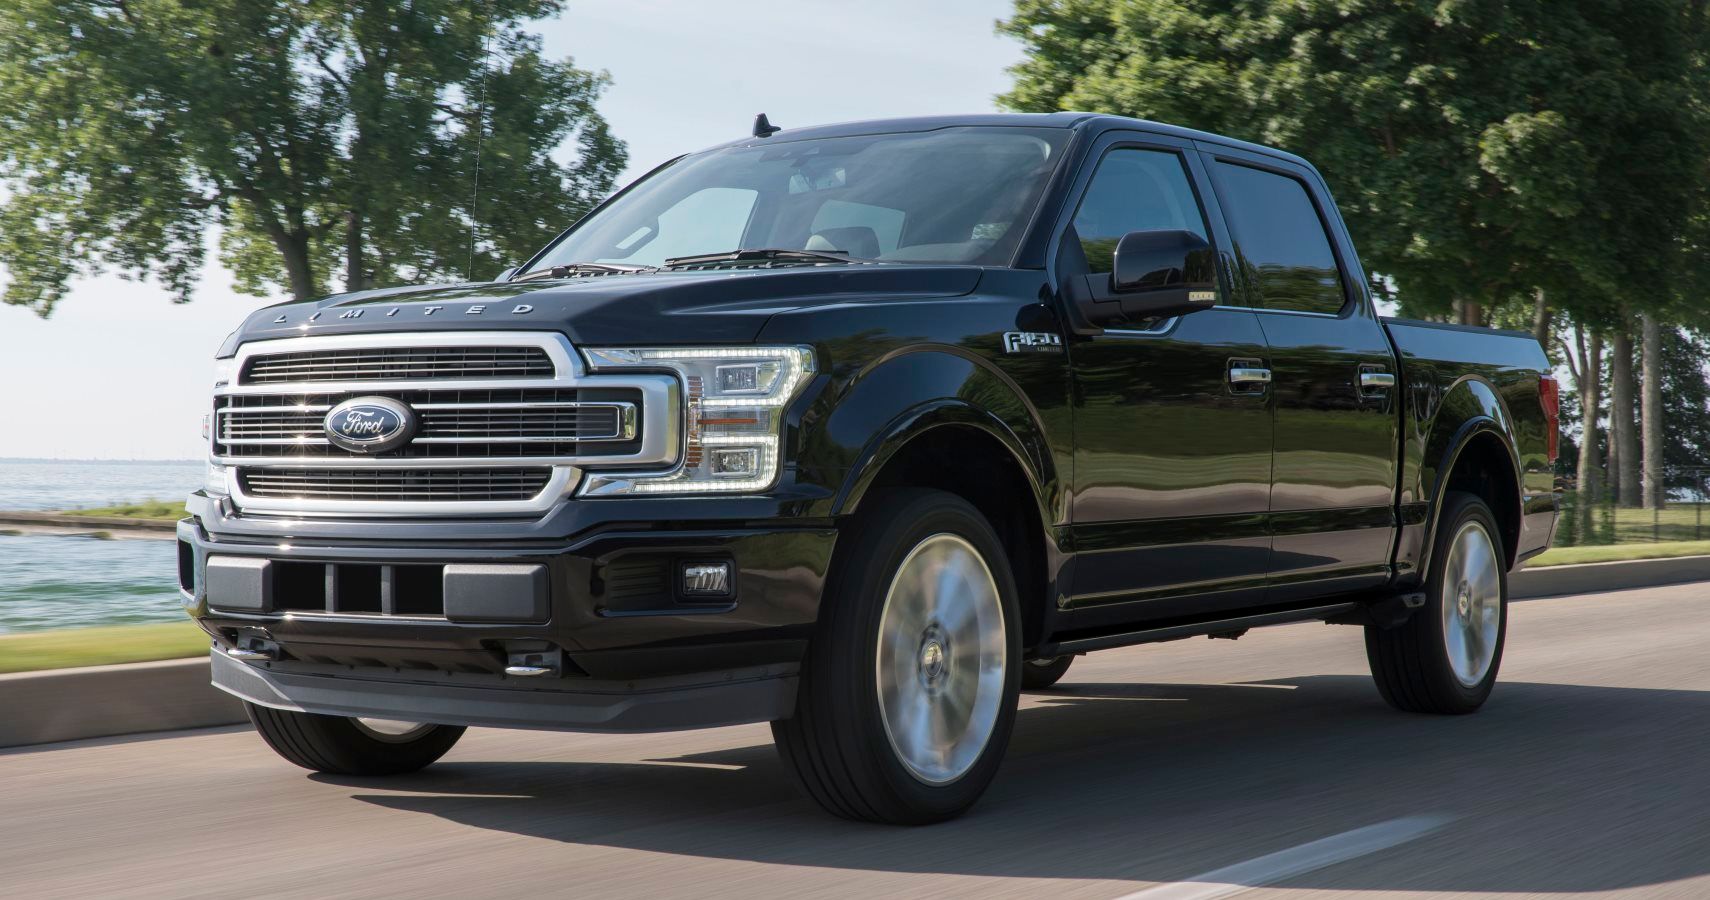 2019 Ford F-150 Limited Recieves Raptor Engine For More Power